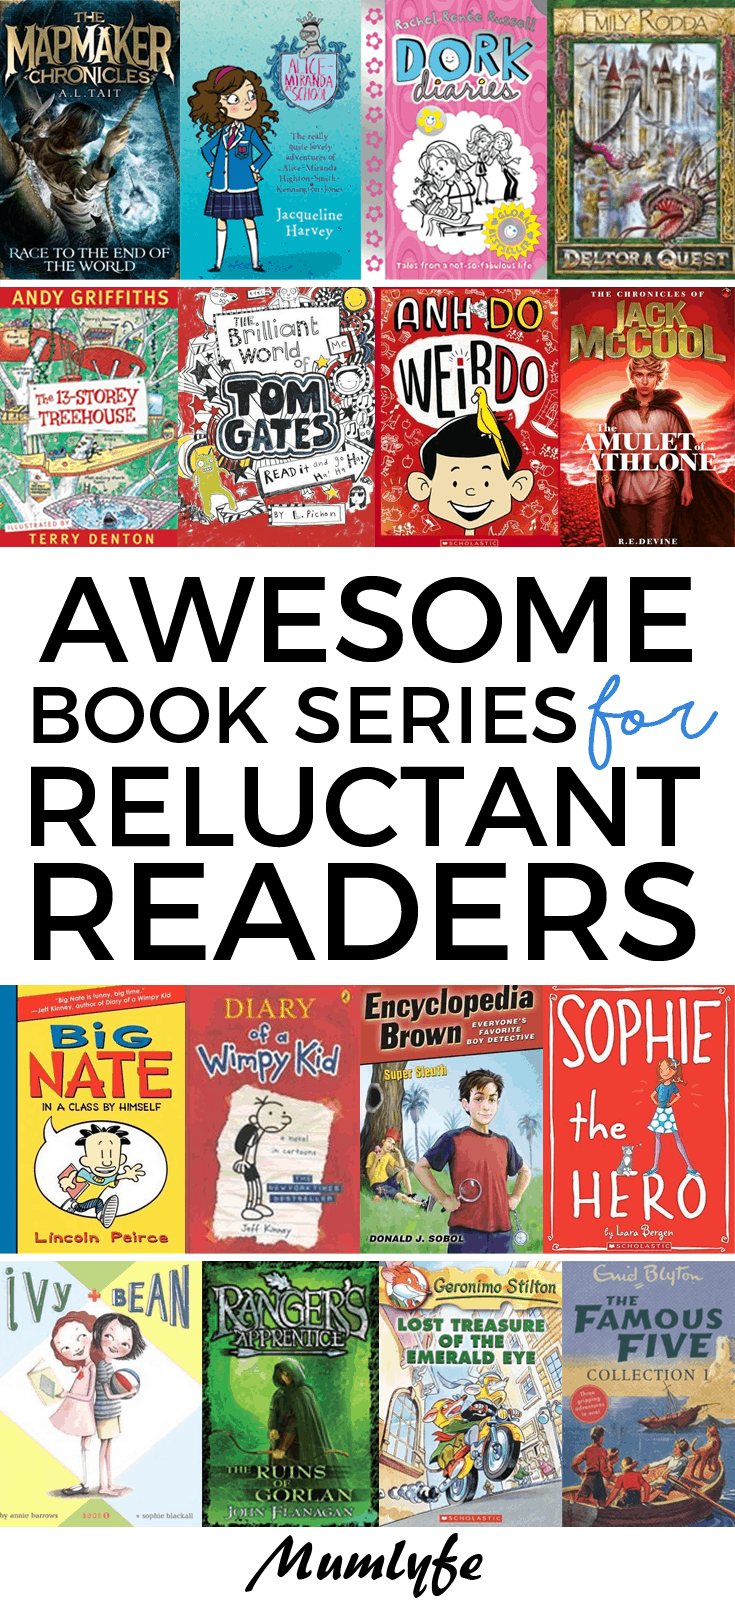 17 awesome book series for reluctant readers